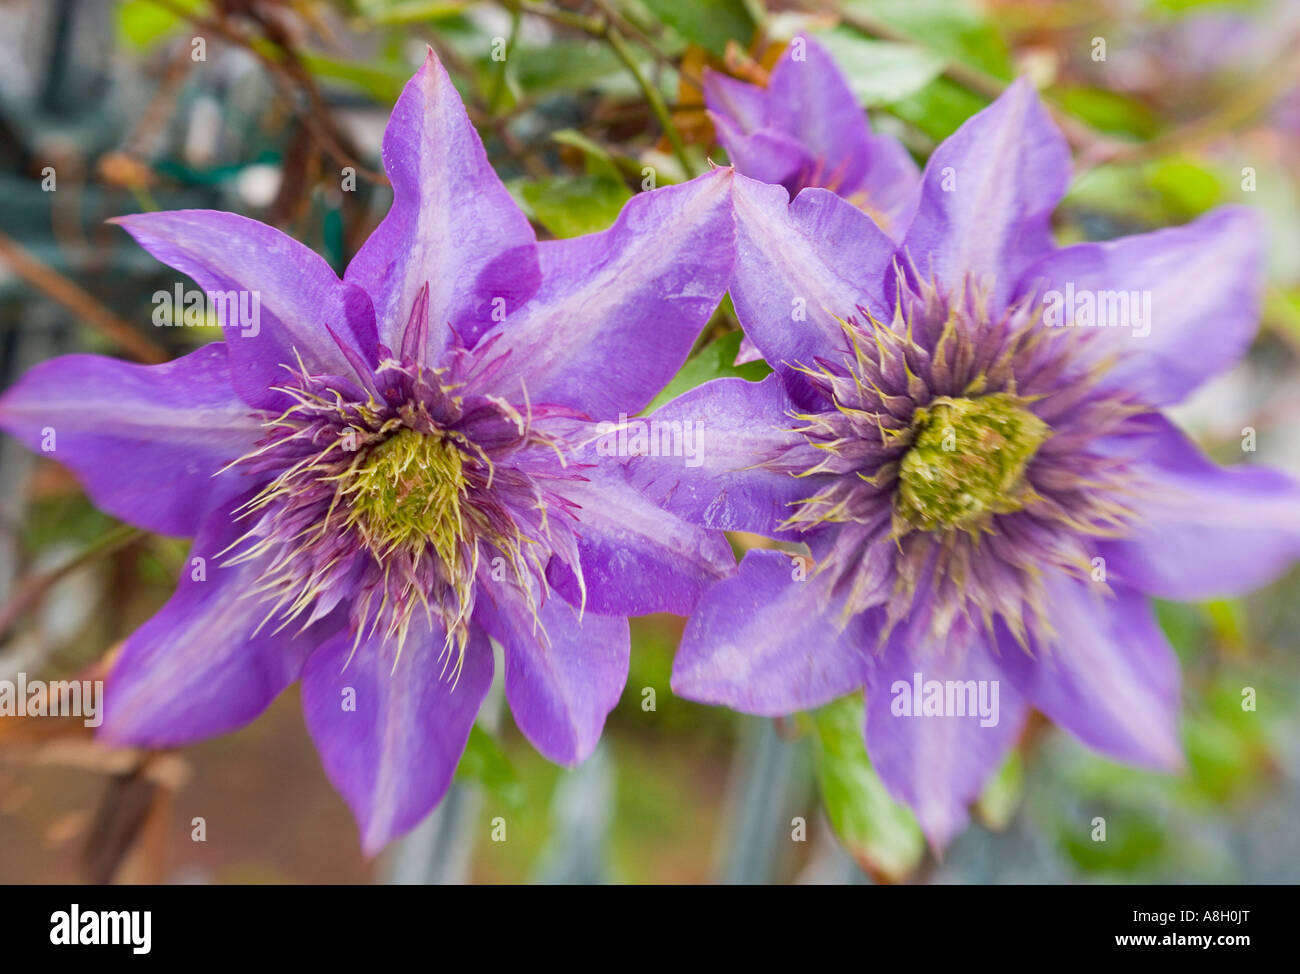 Two purple Clematis flowers. Stock Photo